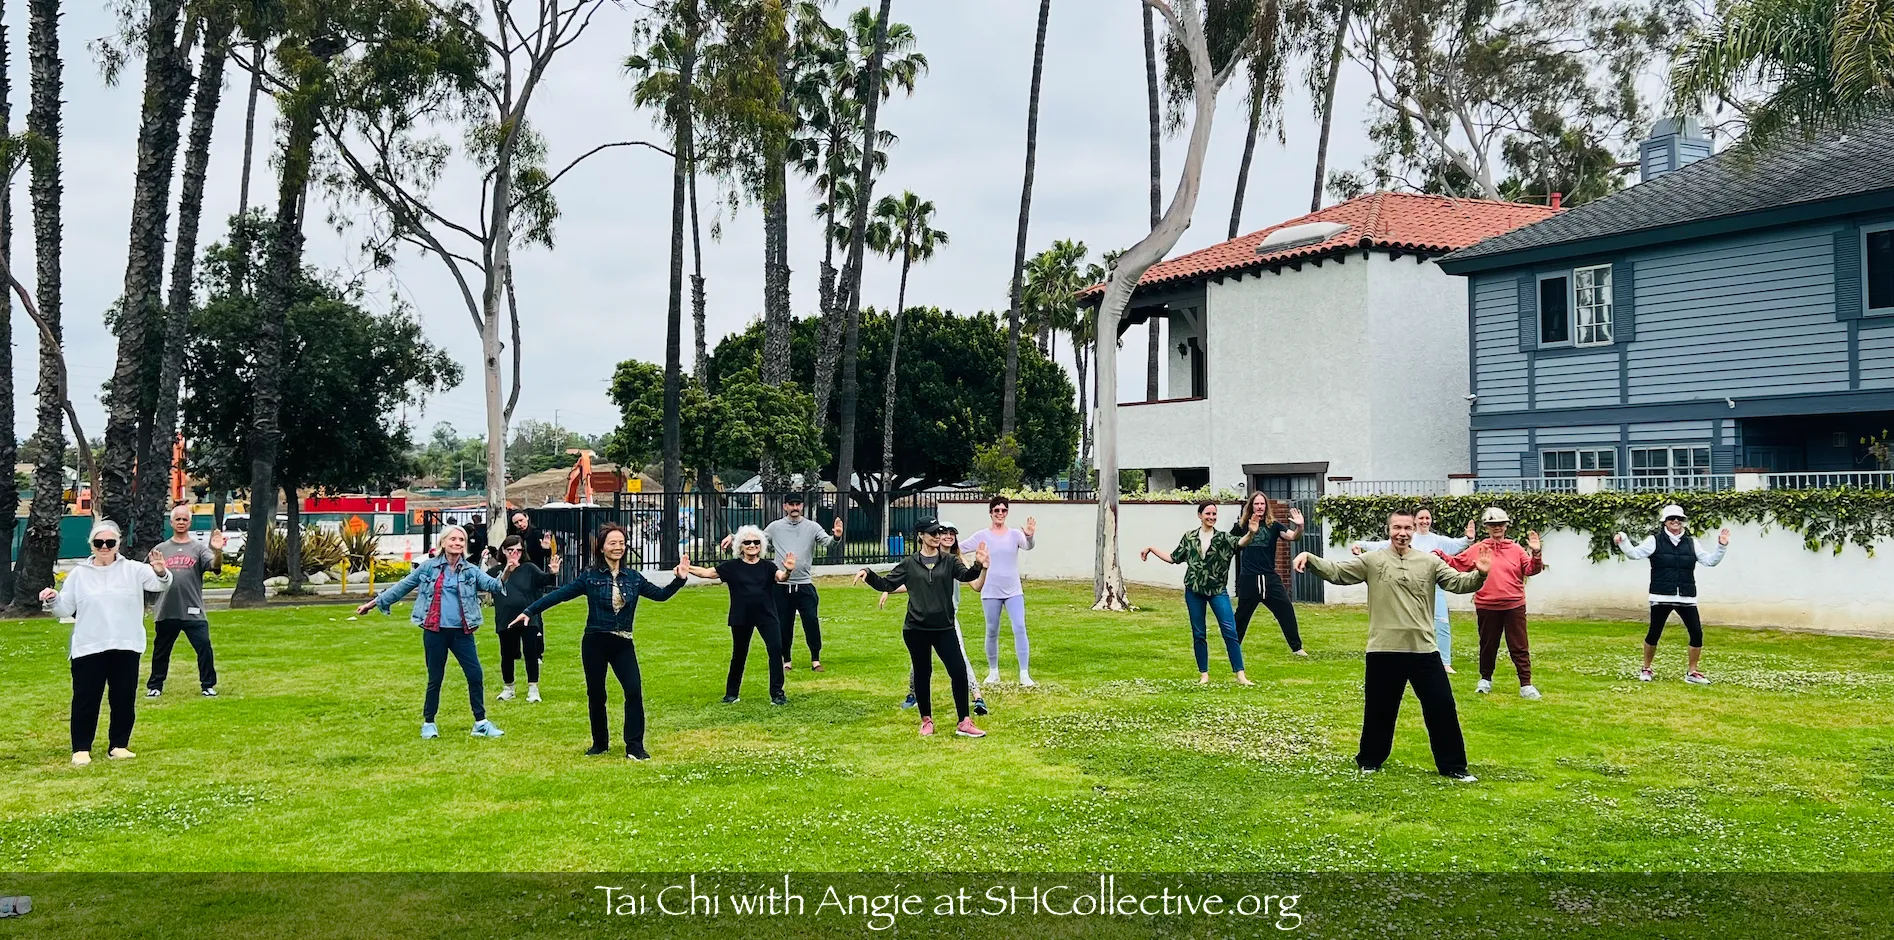 tai chi long beach for beginners class posing a movement at the park